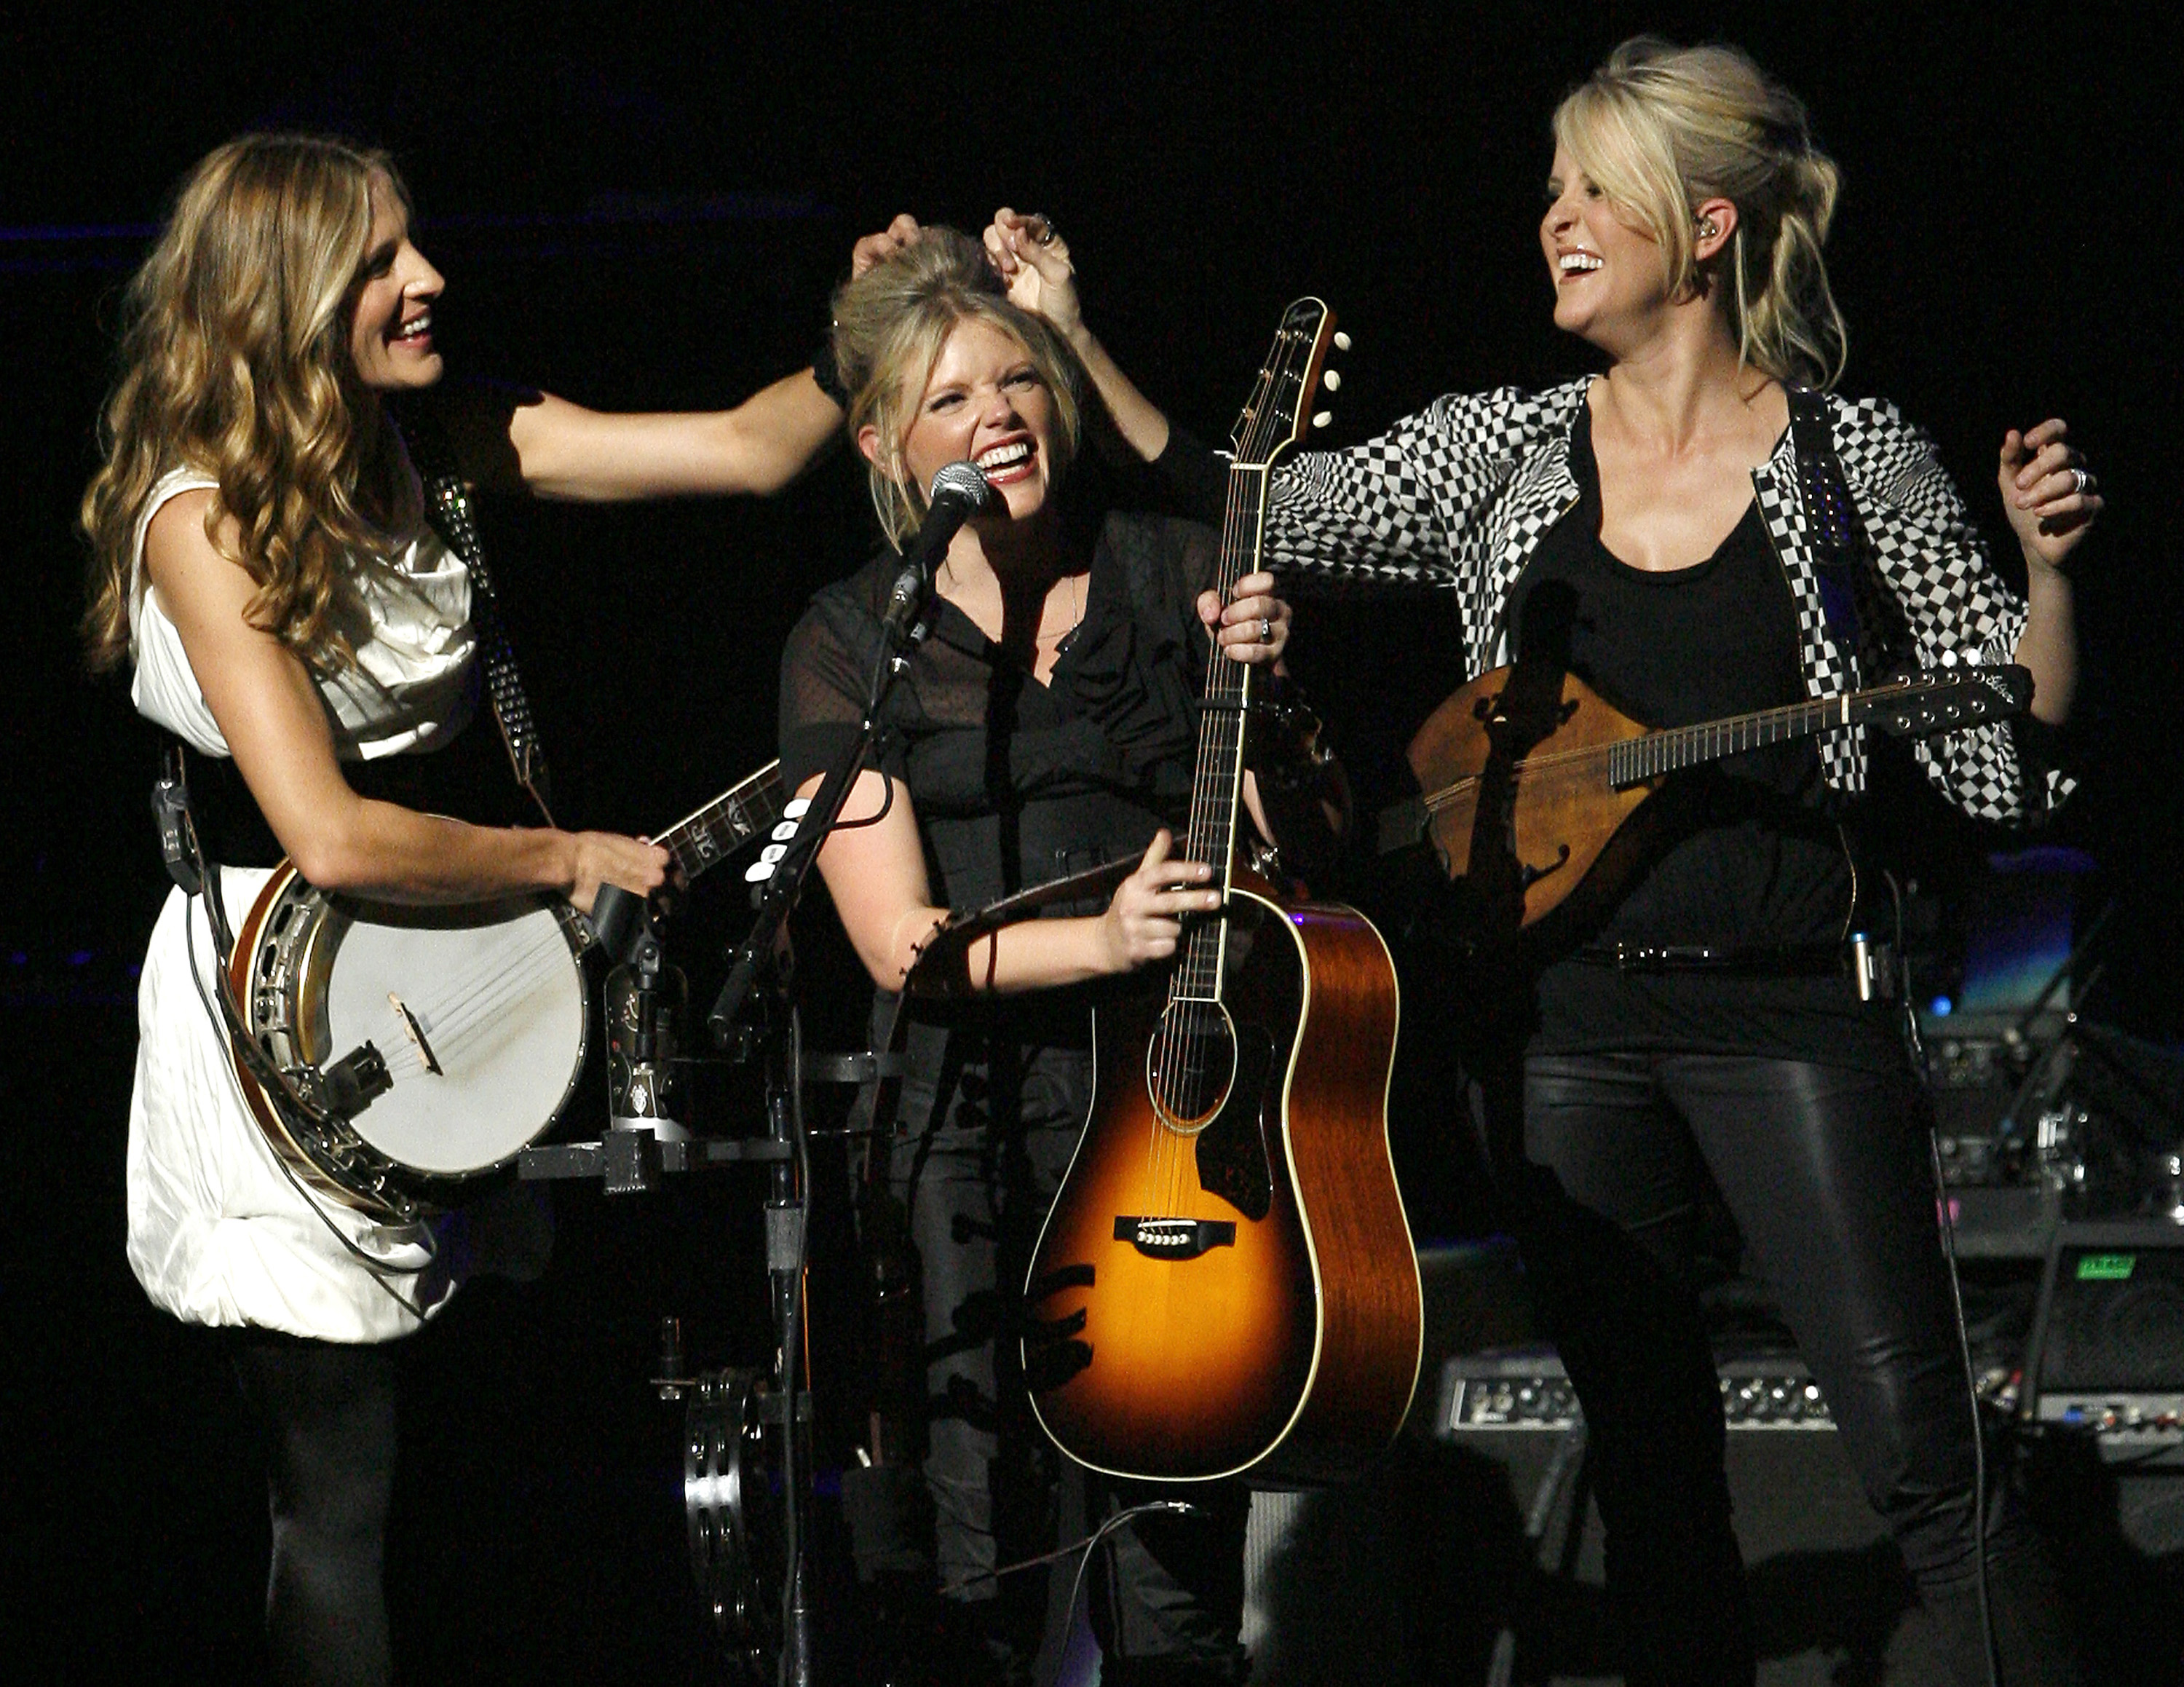  In this Oct. 18, 2007 file photo, Emily Robison, left, and Martie Maguire, right, adjust Natalie Maines' hair as the Dixie Chicks perform in Los Angeles. (AP Photo/Gus Ruelas, file)